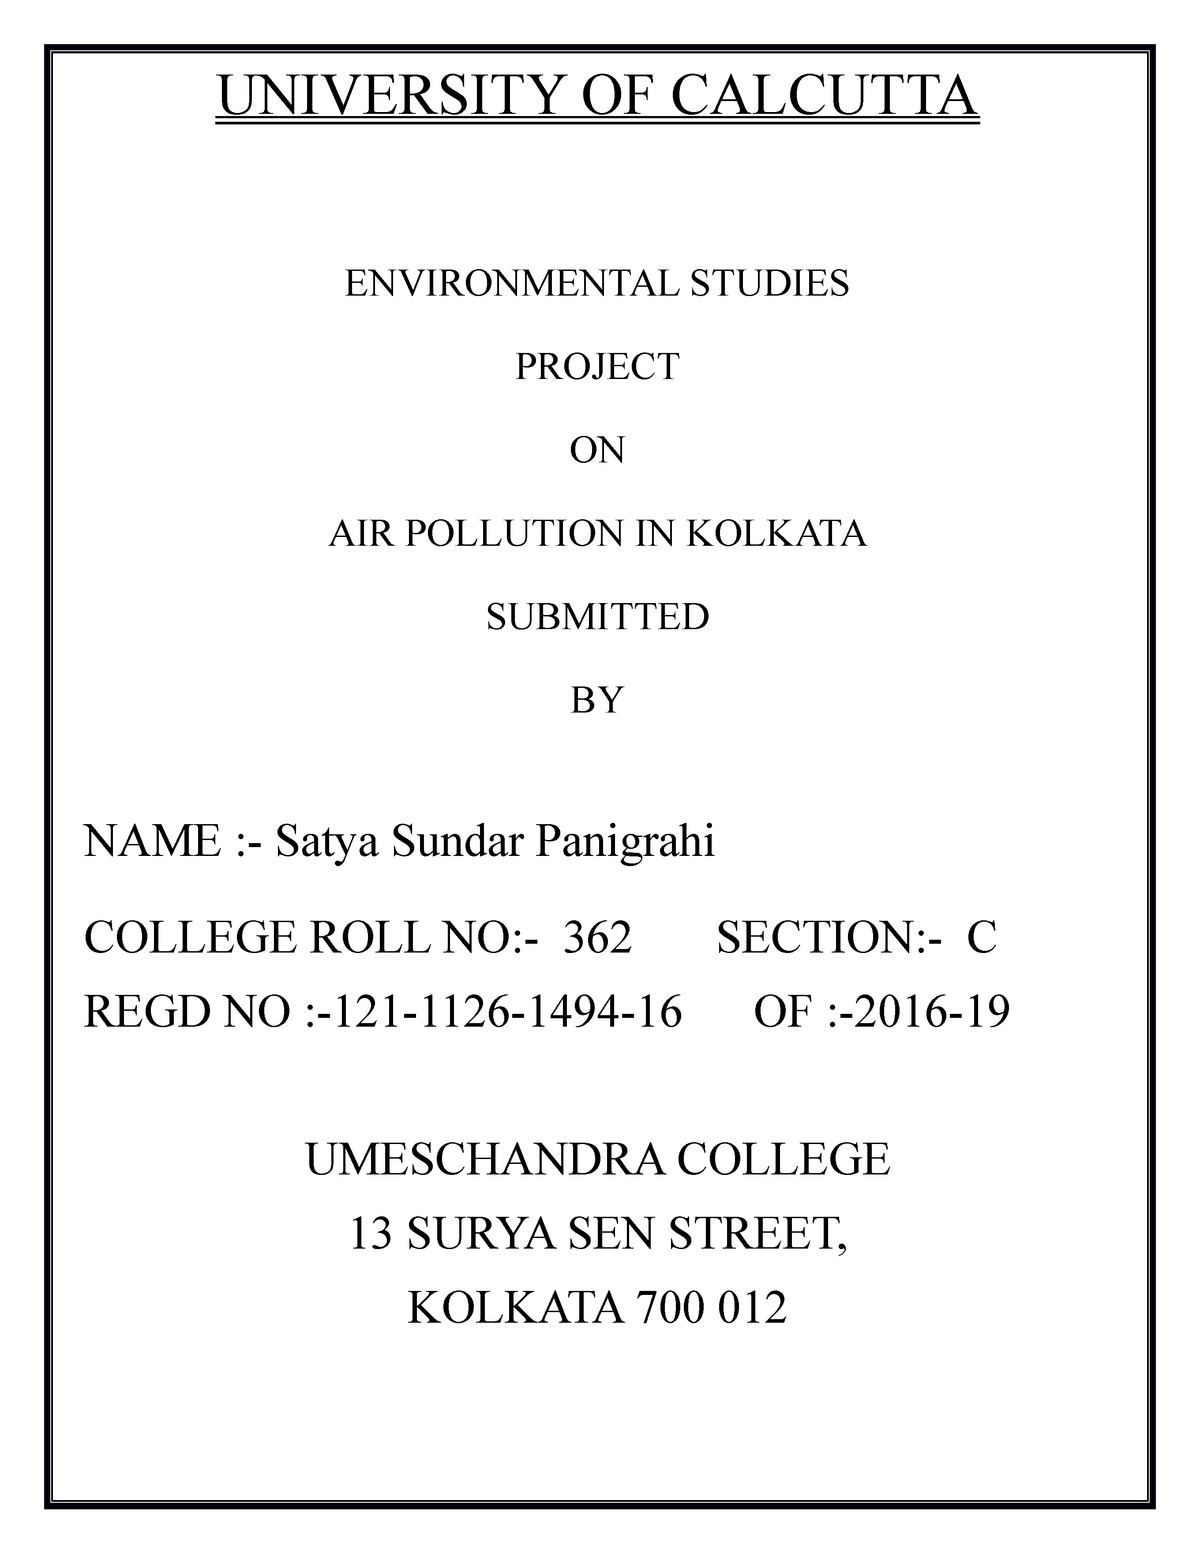 air pollution project work methodology pdf